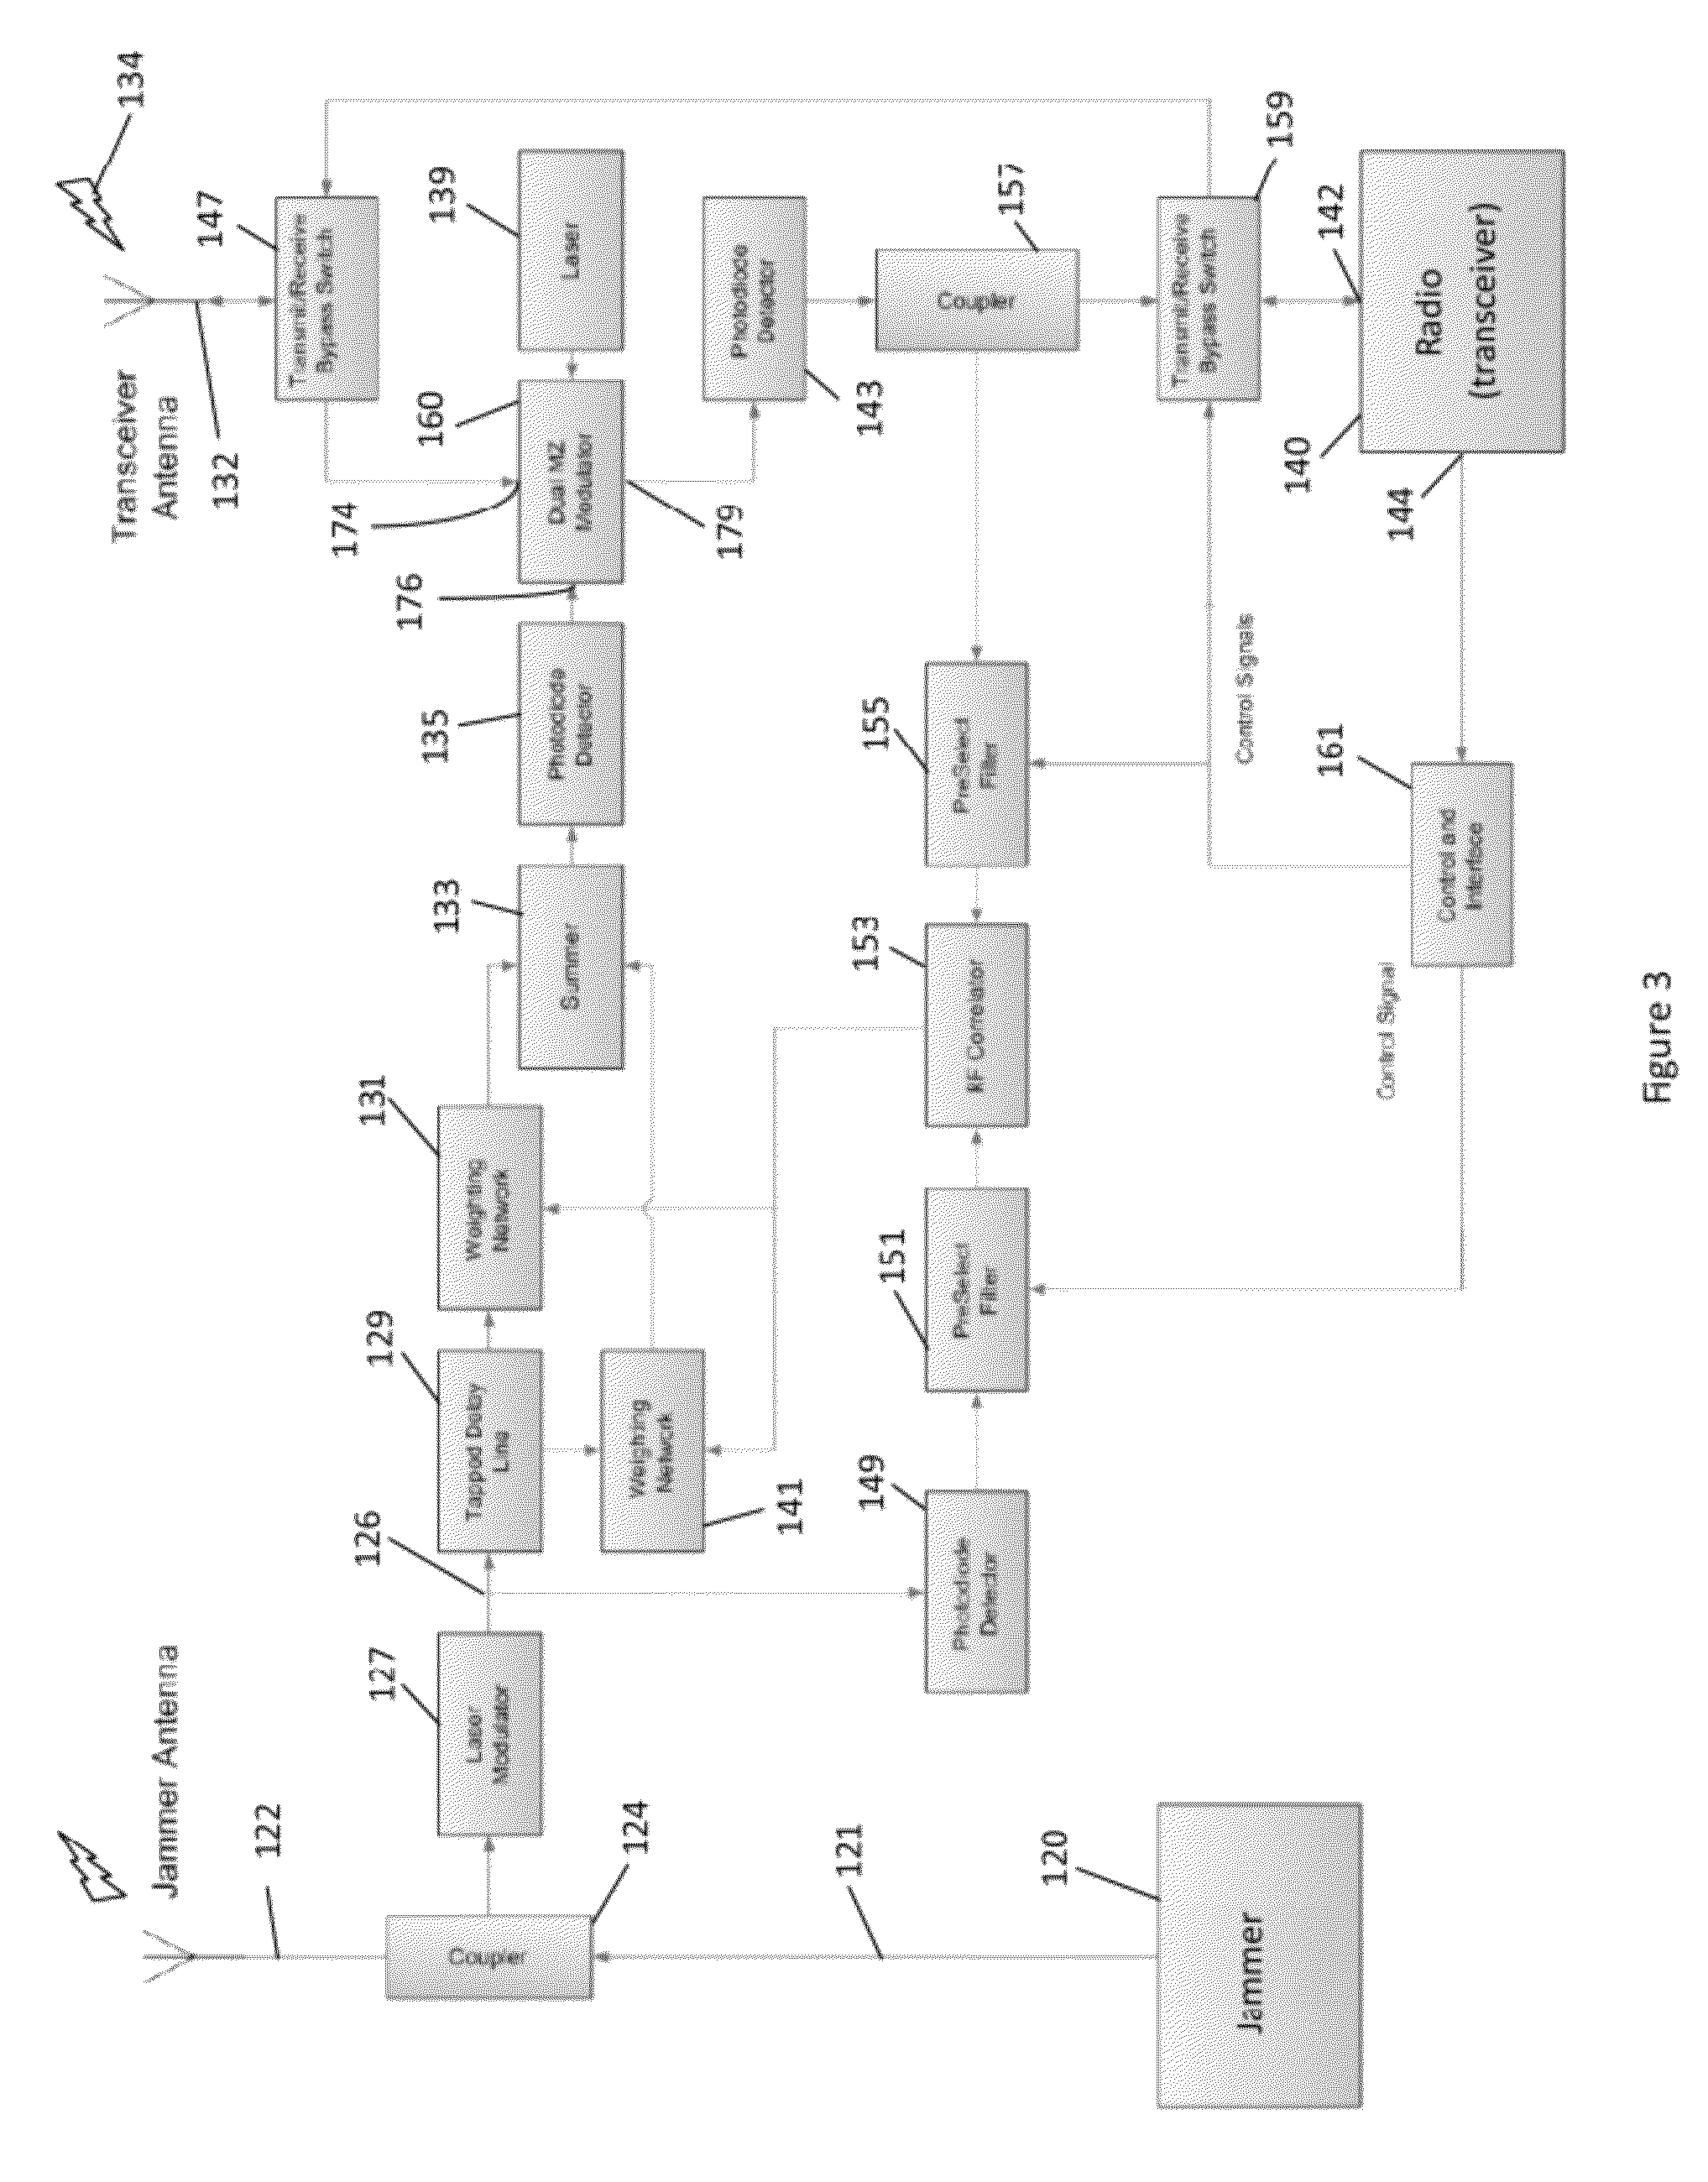 System and method for broadband RF interference cancellation